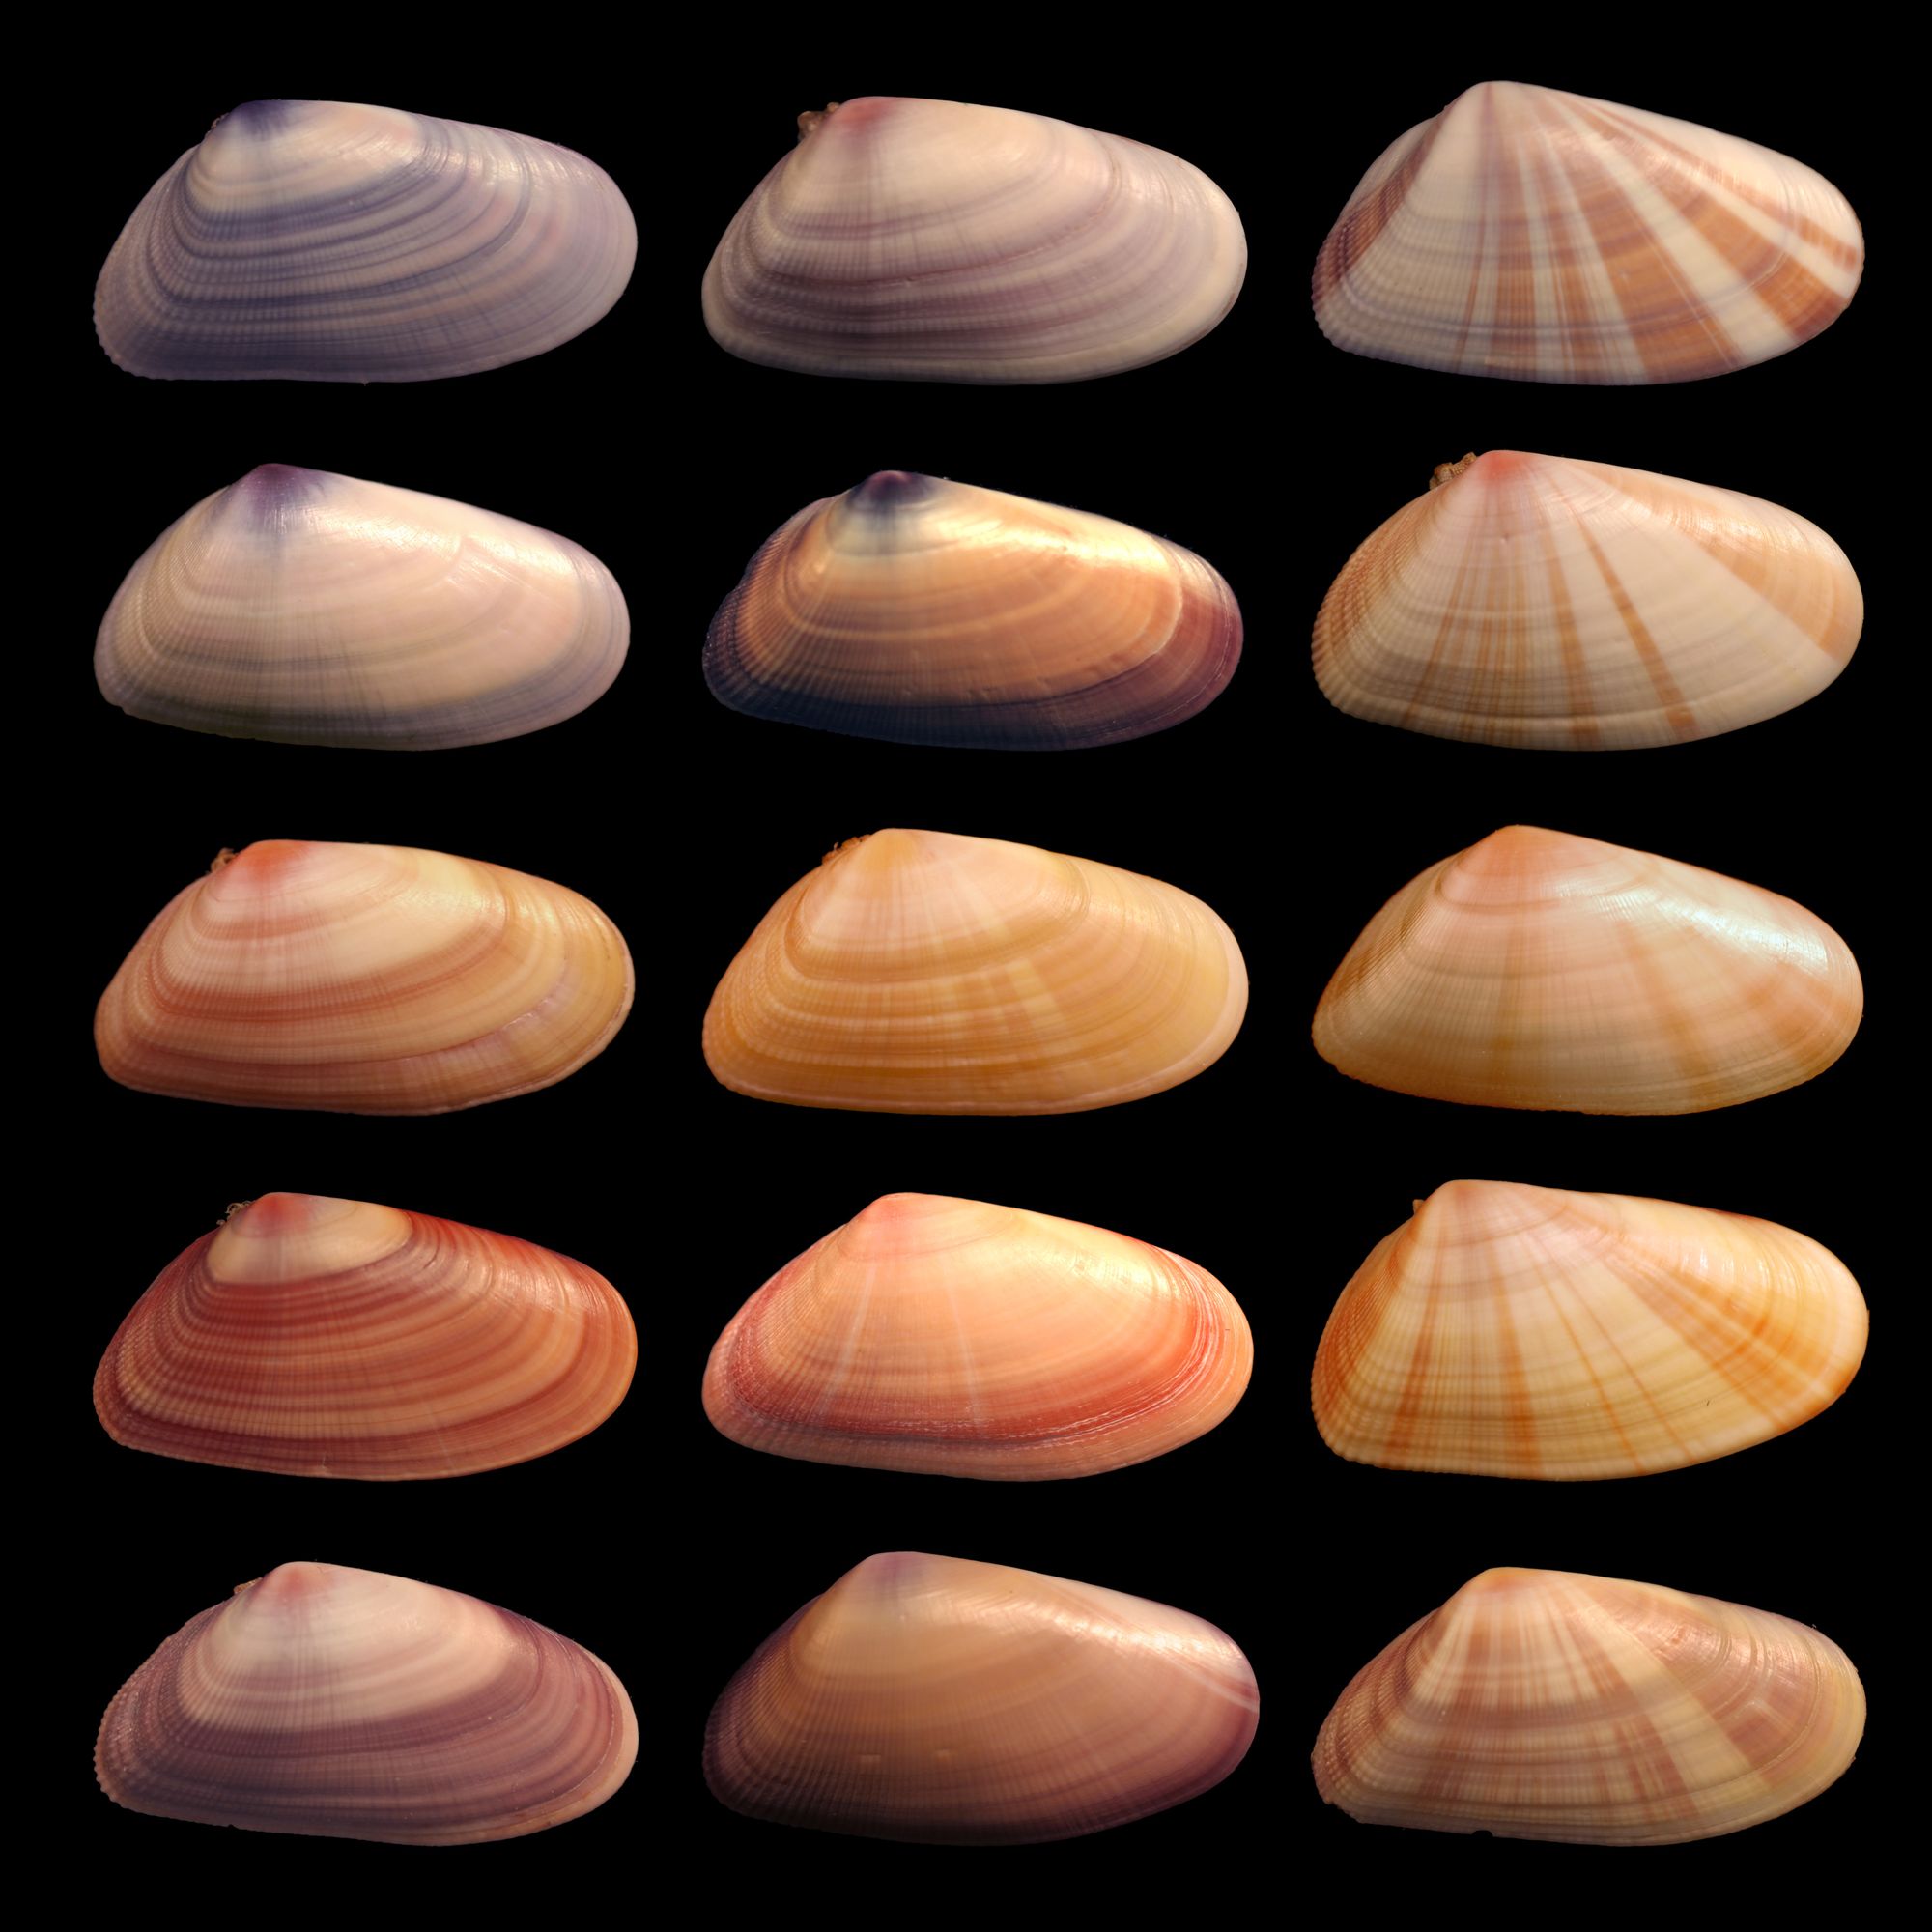 Coquina variation by Debivort, Wikimedia Commons